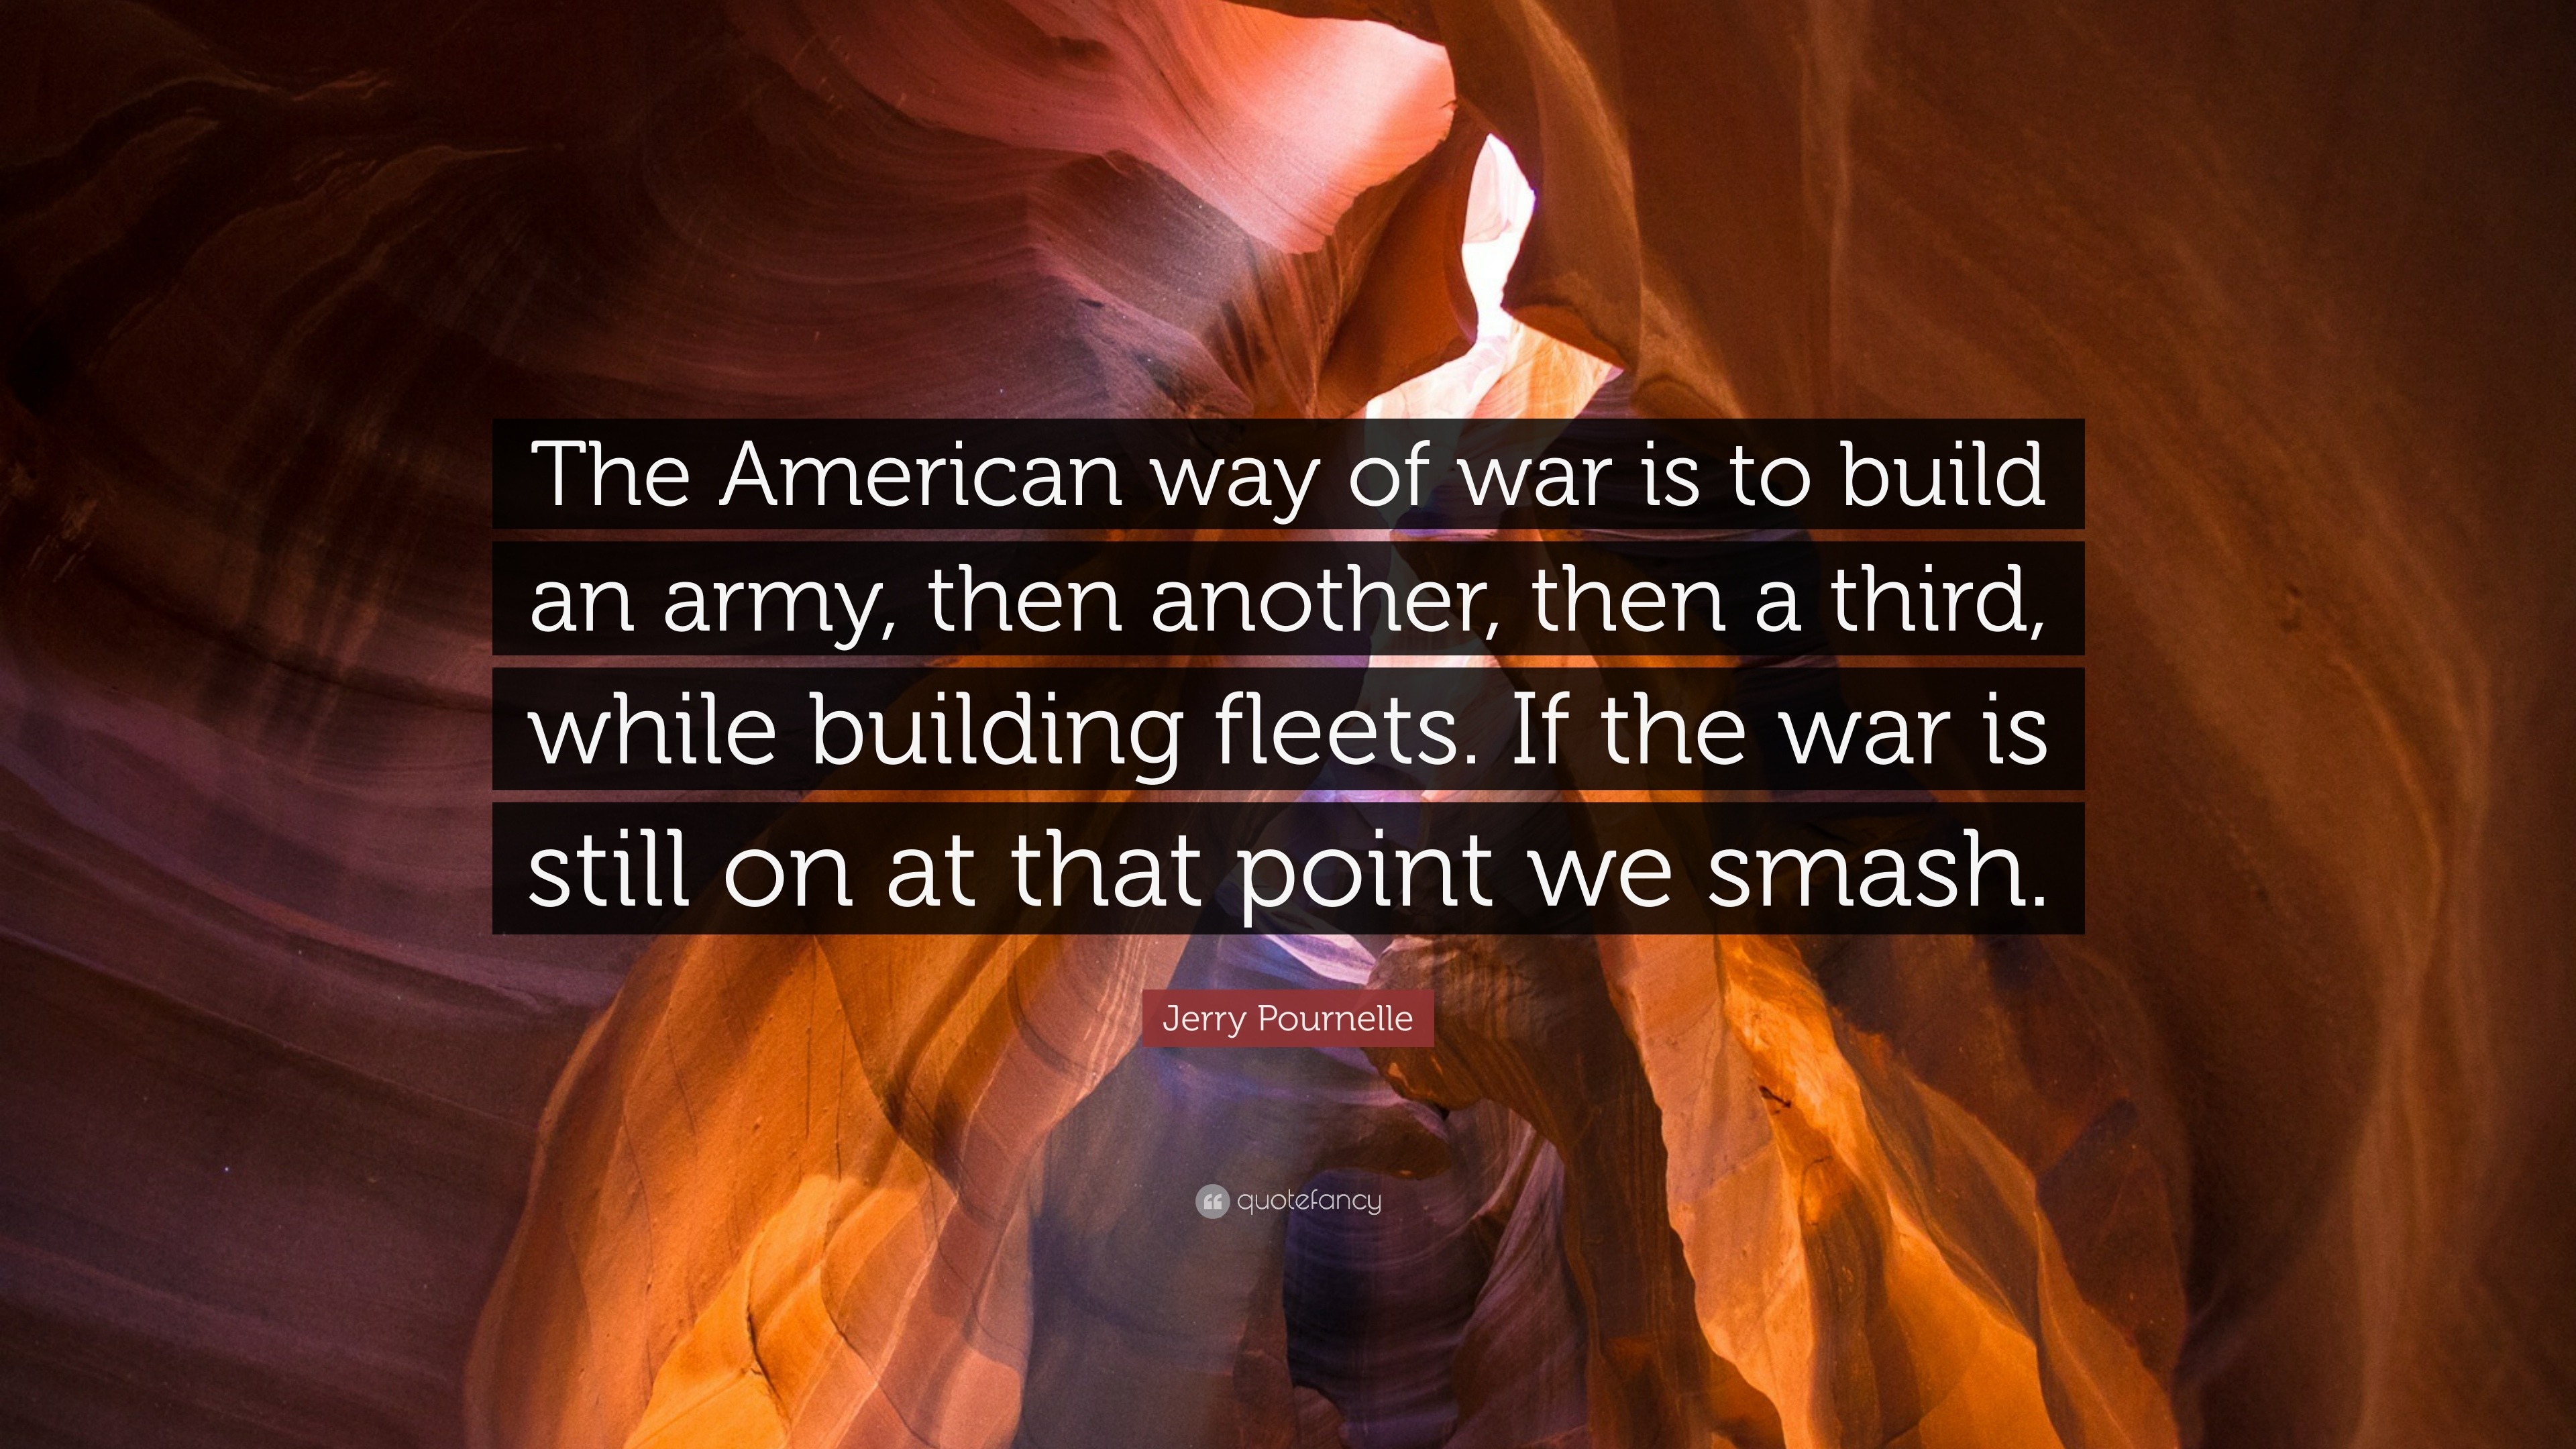 Jerry Pournelle Quote: “The American way of war is to build an army ...